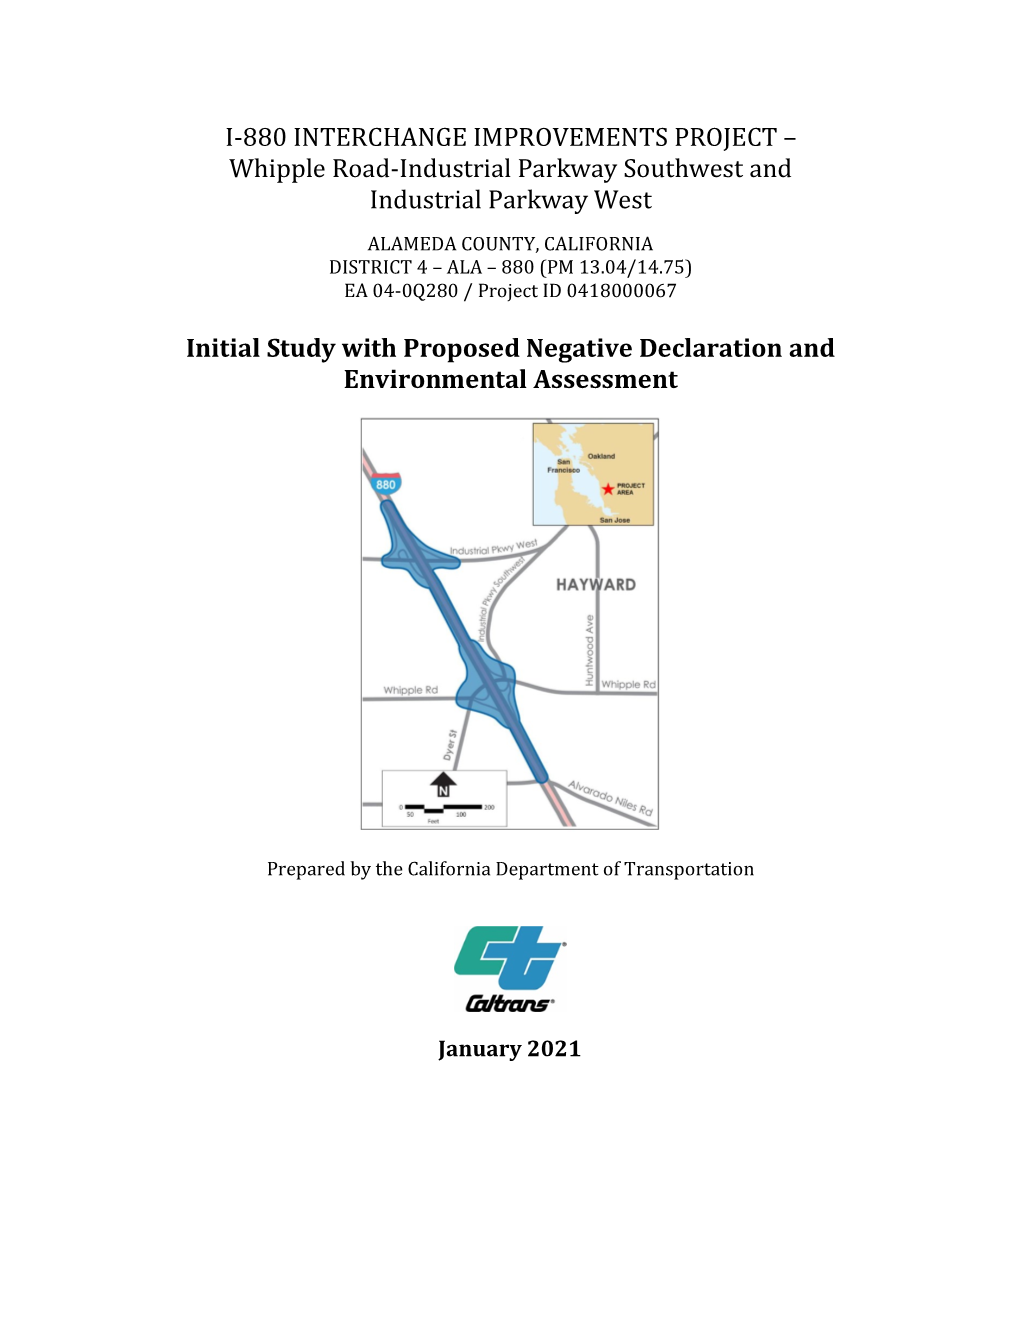 I-880 INTERCHANGE IMPROVEMENTS PROJECT – Whipple Road-Industrial Parkway Southwest and Industrial Parkway West